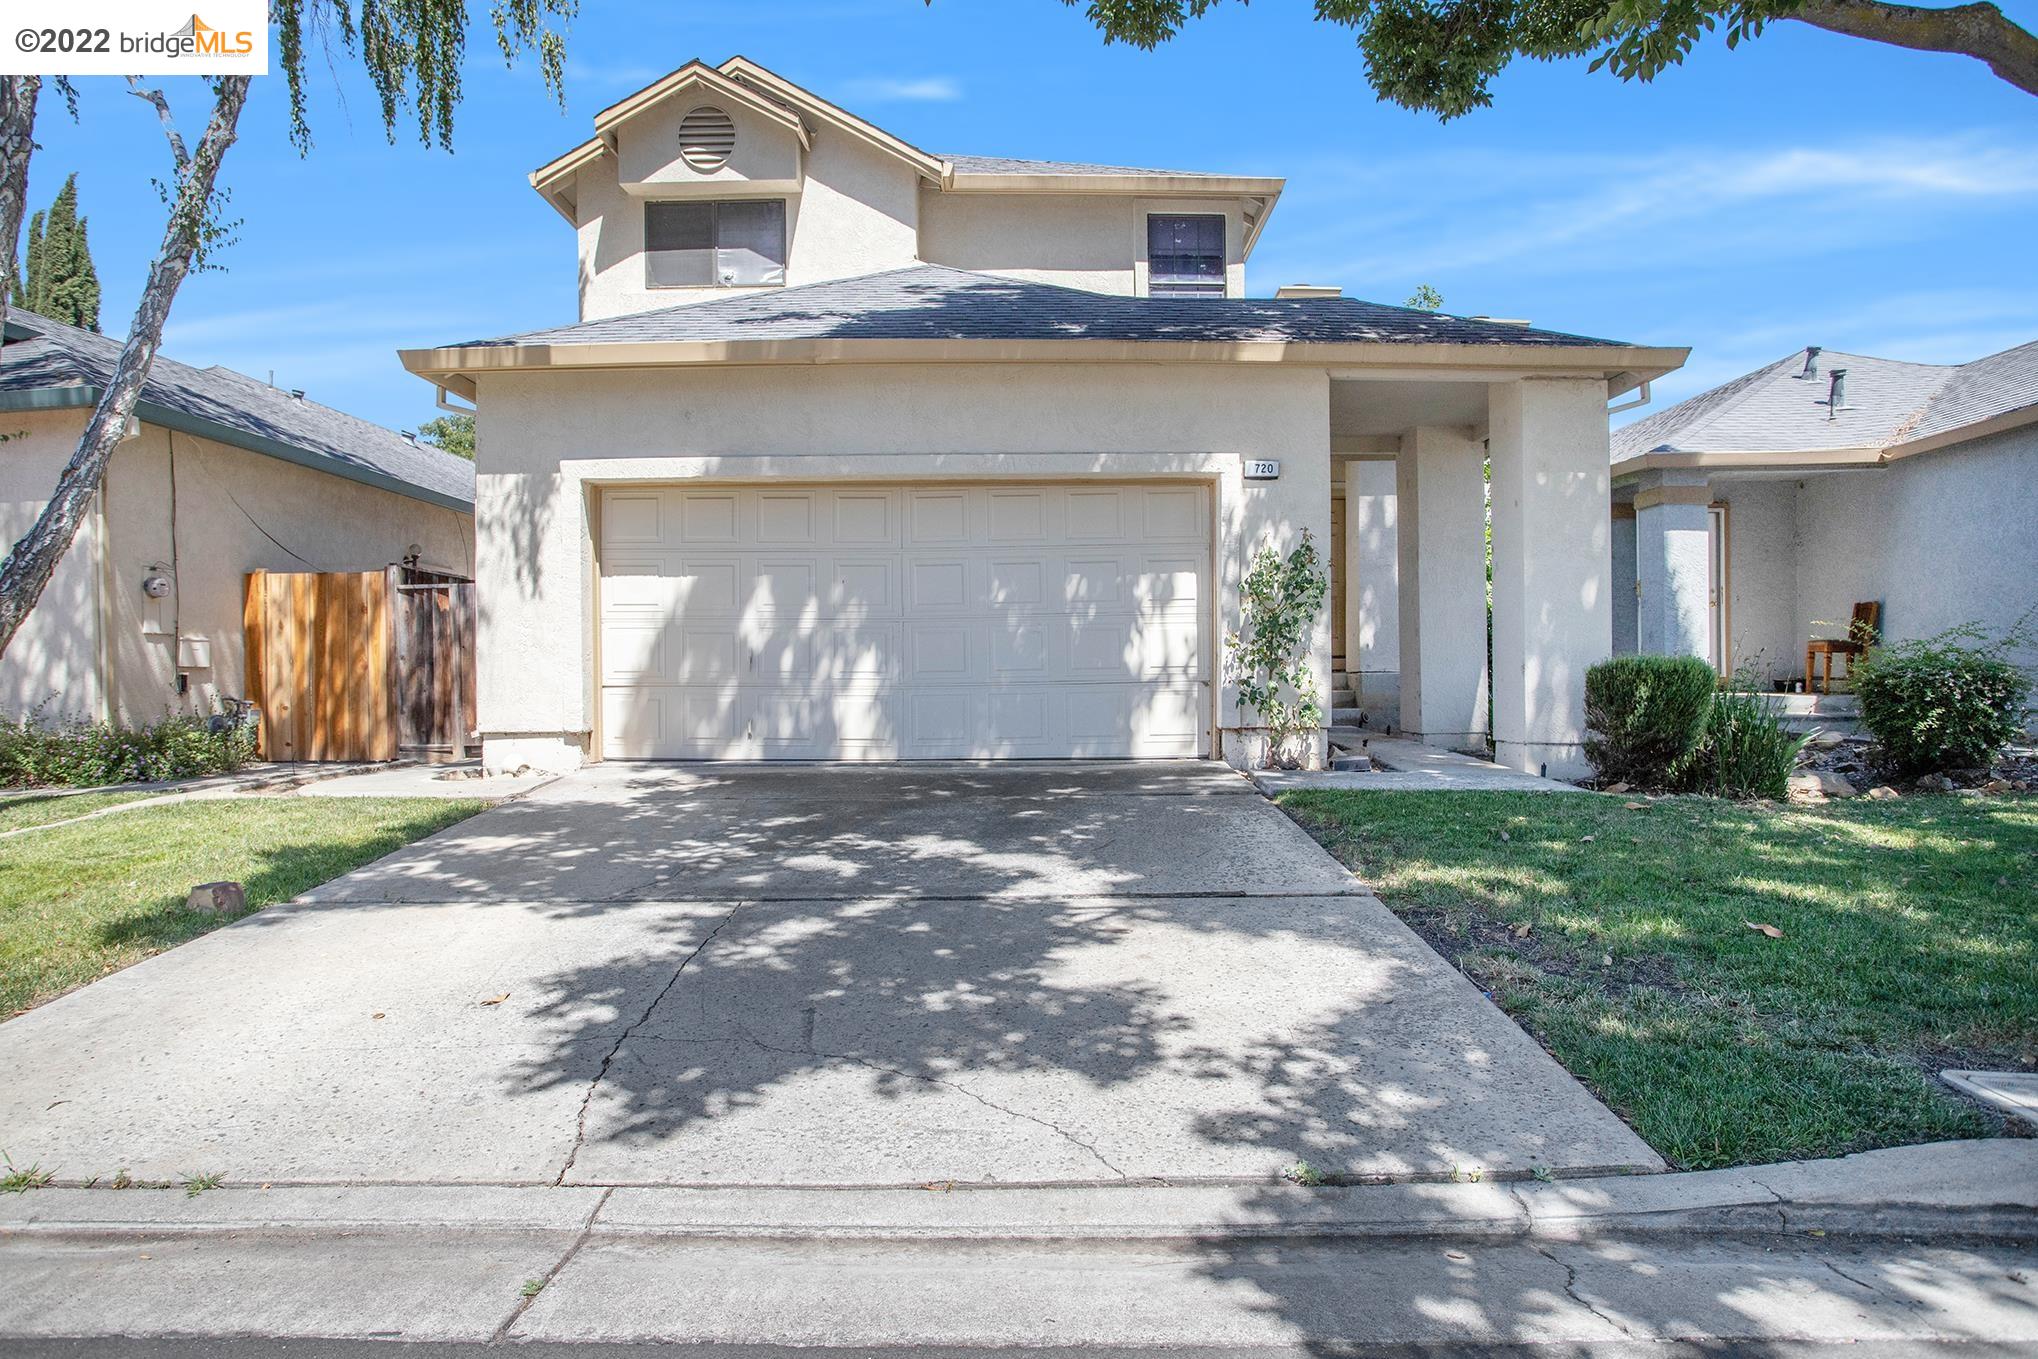 Price just reduced. 4 Bed 2 1/2 Bath for this centrally located home.  It's 1751 sq feet in a quiet court. Big backyard.  low low Association fee, has nice private neighborhood pool.